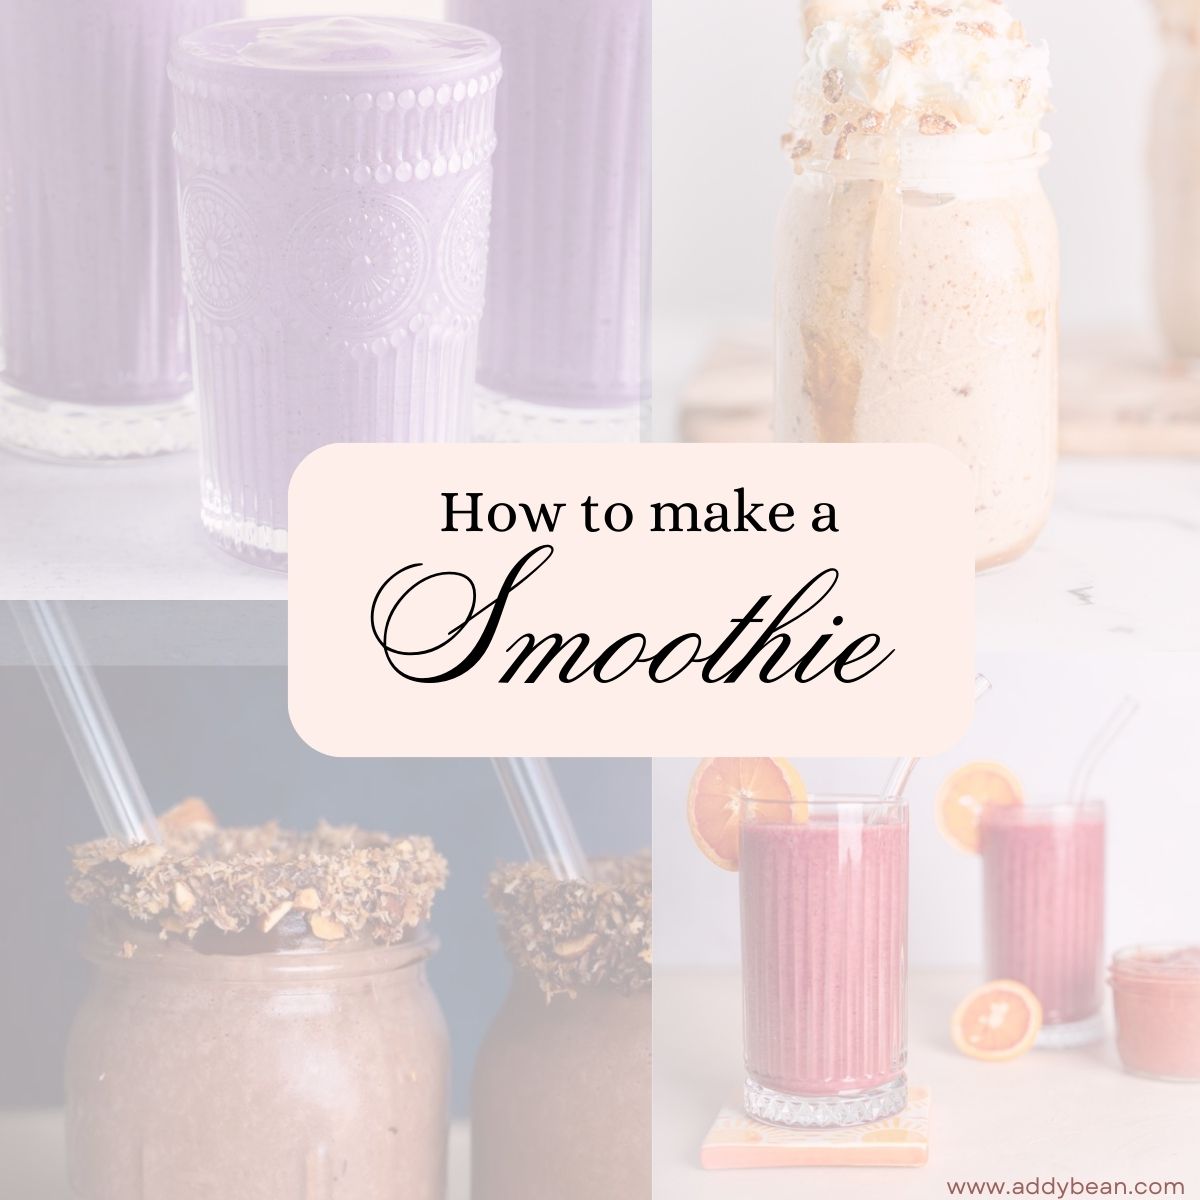 4 transparent images of smoothies in behind the text saying How to make a smoothie in various fonts.